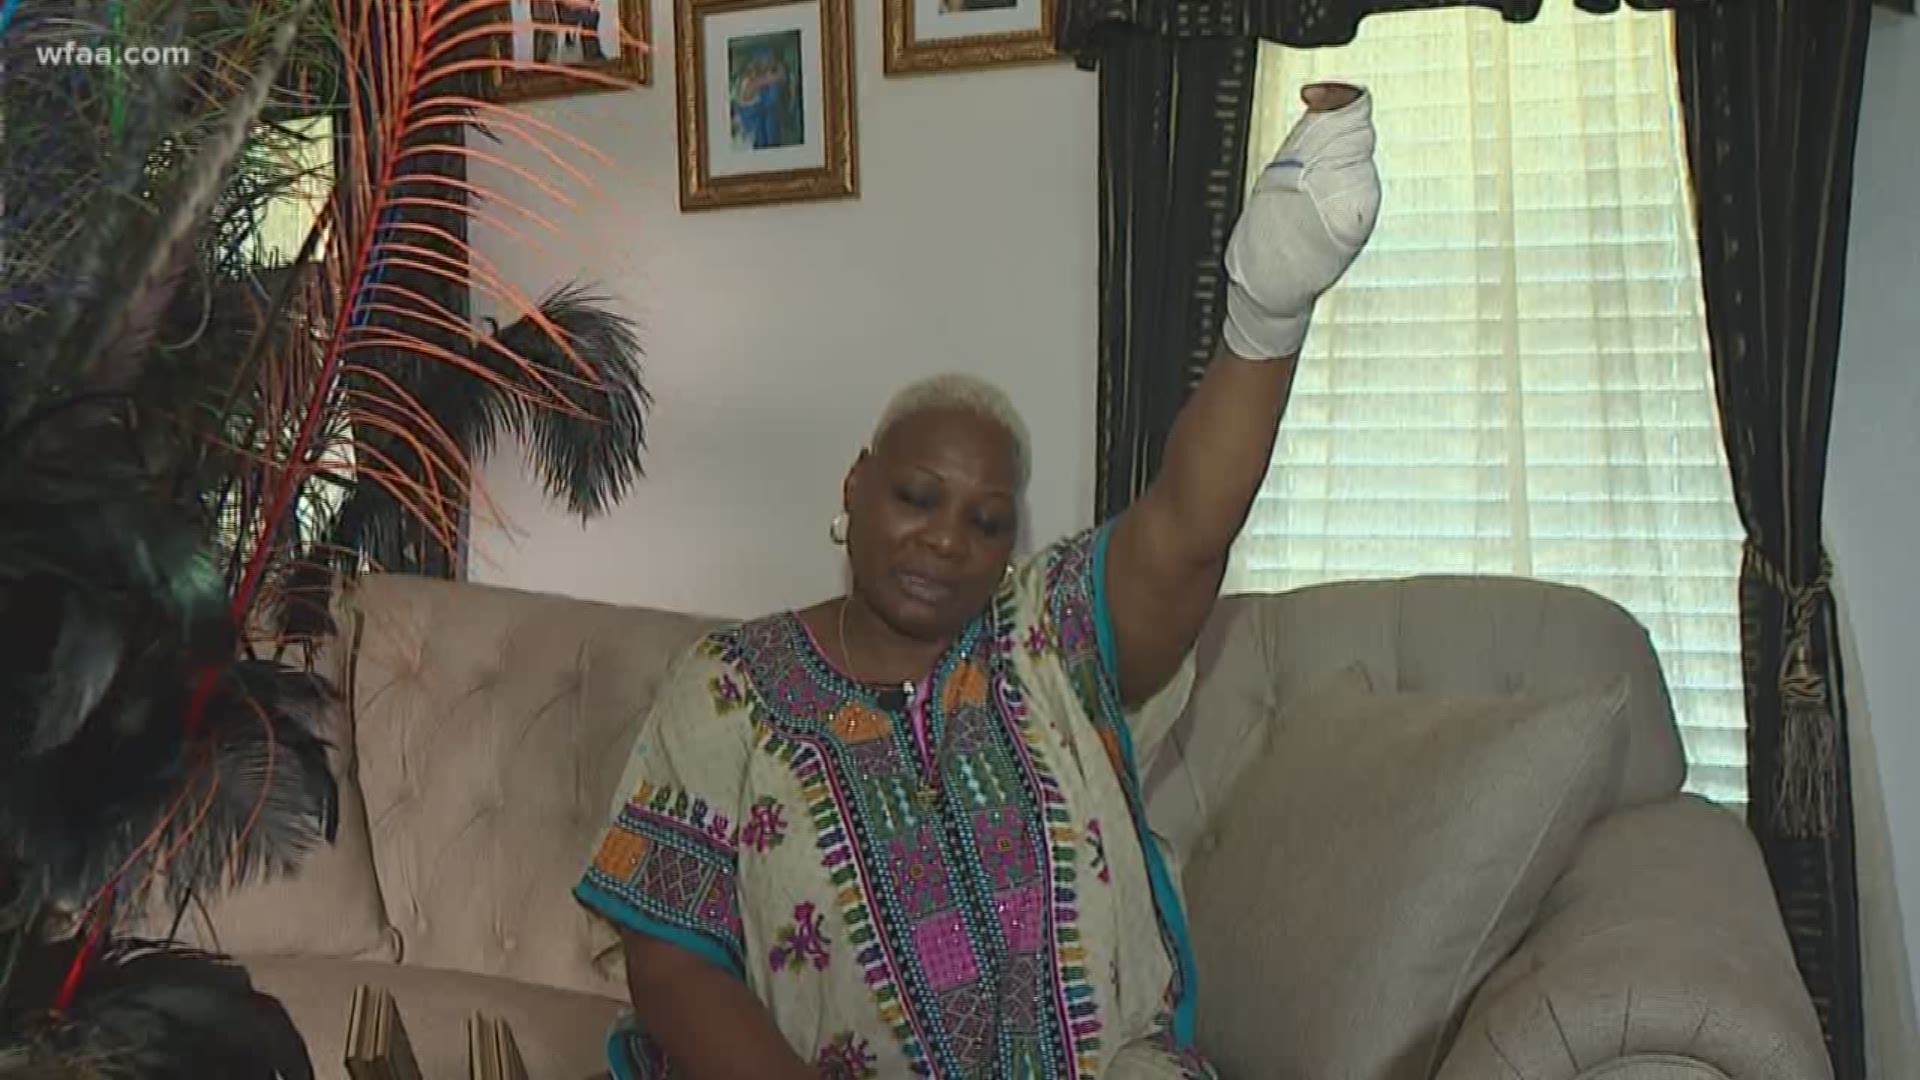 Grandmother's hand blown off by firework